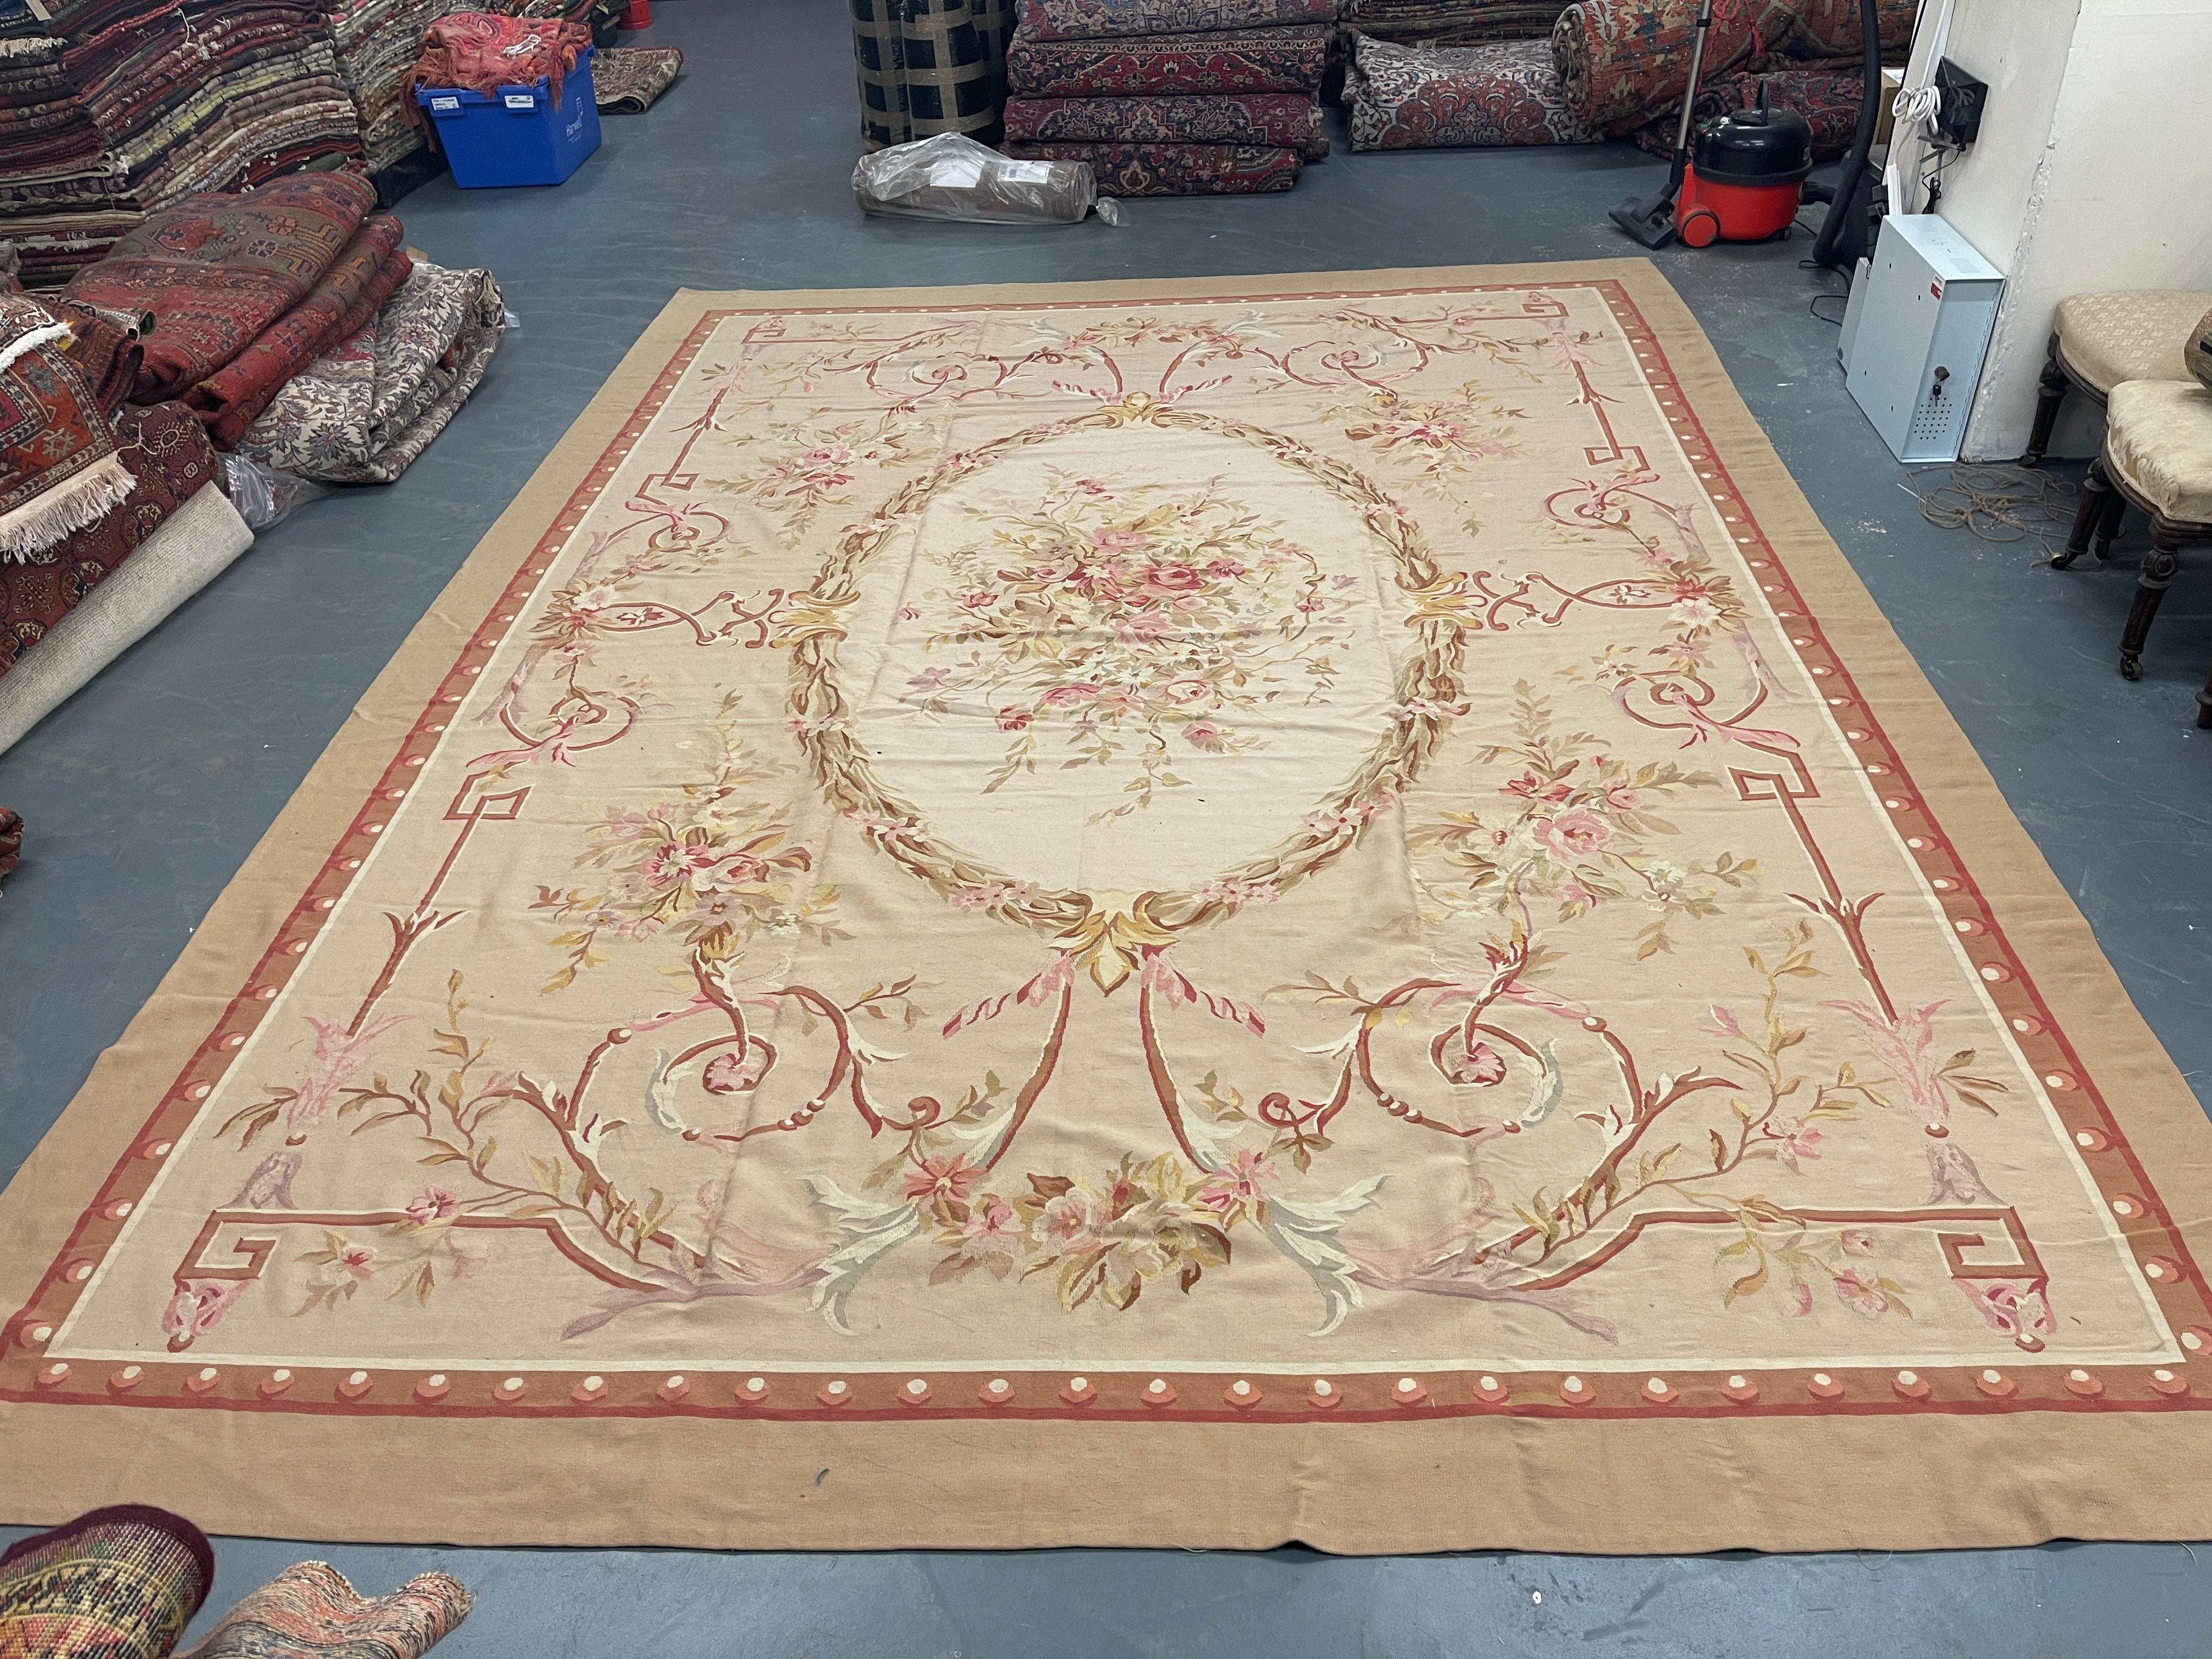 This fantastic area rug has been handwoven by Aubusson with a beautiful symmetrical floral design woven on a beige-pink background with accents of coffee, burgundy, and ivory. This elegant piece's colour and design make it the perfect accent